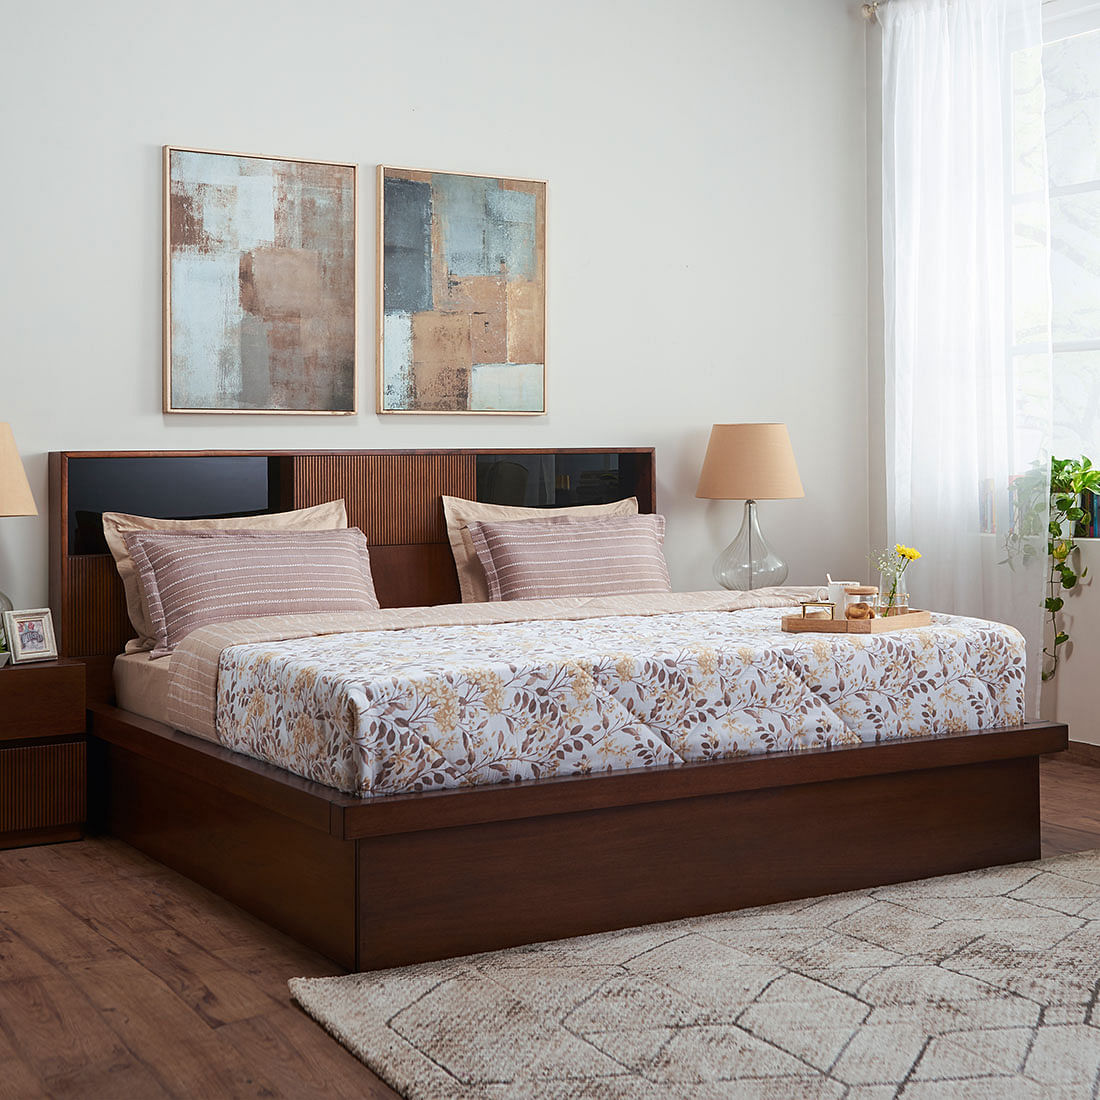 Mystique Solidwood King bed with Hydraulic storage in Walnut Colour